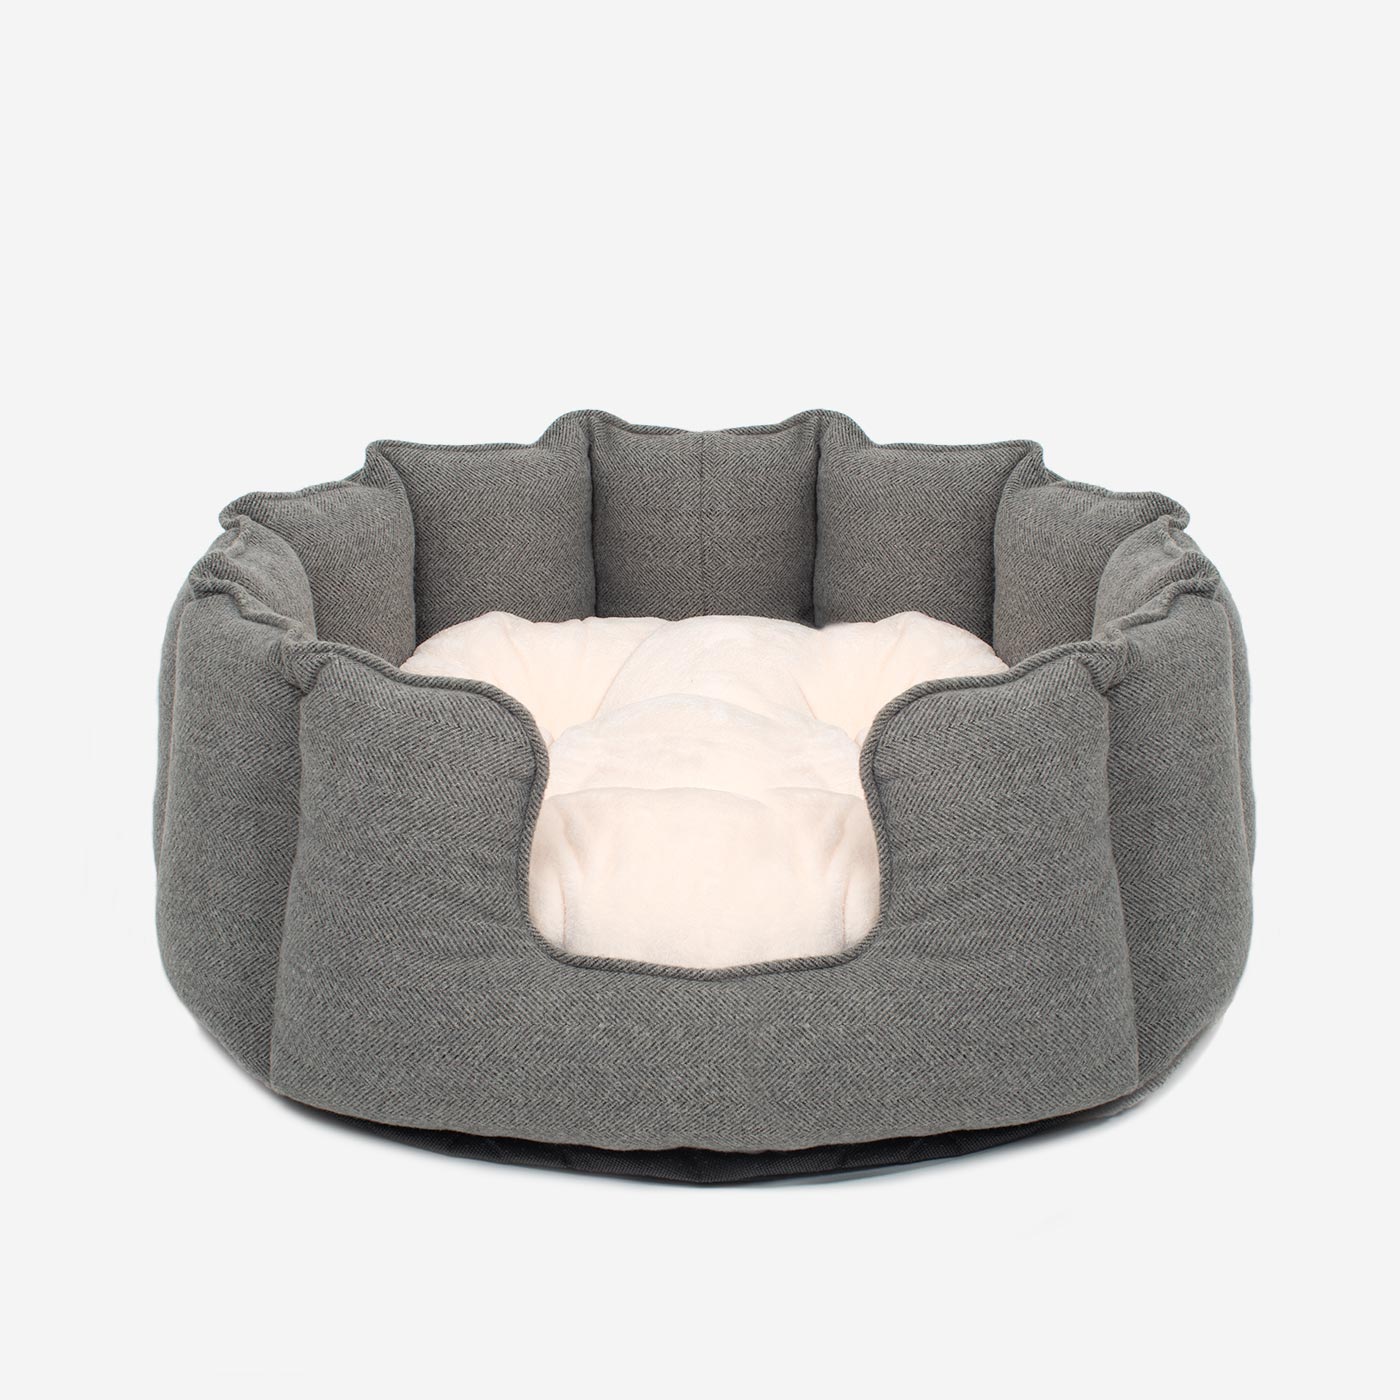 Discover Our Luxurious High Wall Bed For Dogs, Featuring inner pillow with plush teddy fleece on one side To Craft The Perfect Dogs Bed In Stunning Pewter Herringbone Tweed! Available To Personalize Now at Lords & Labradors US